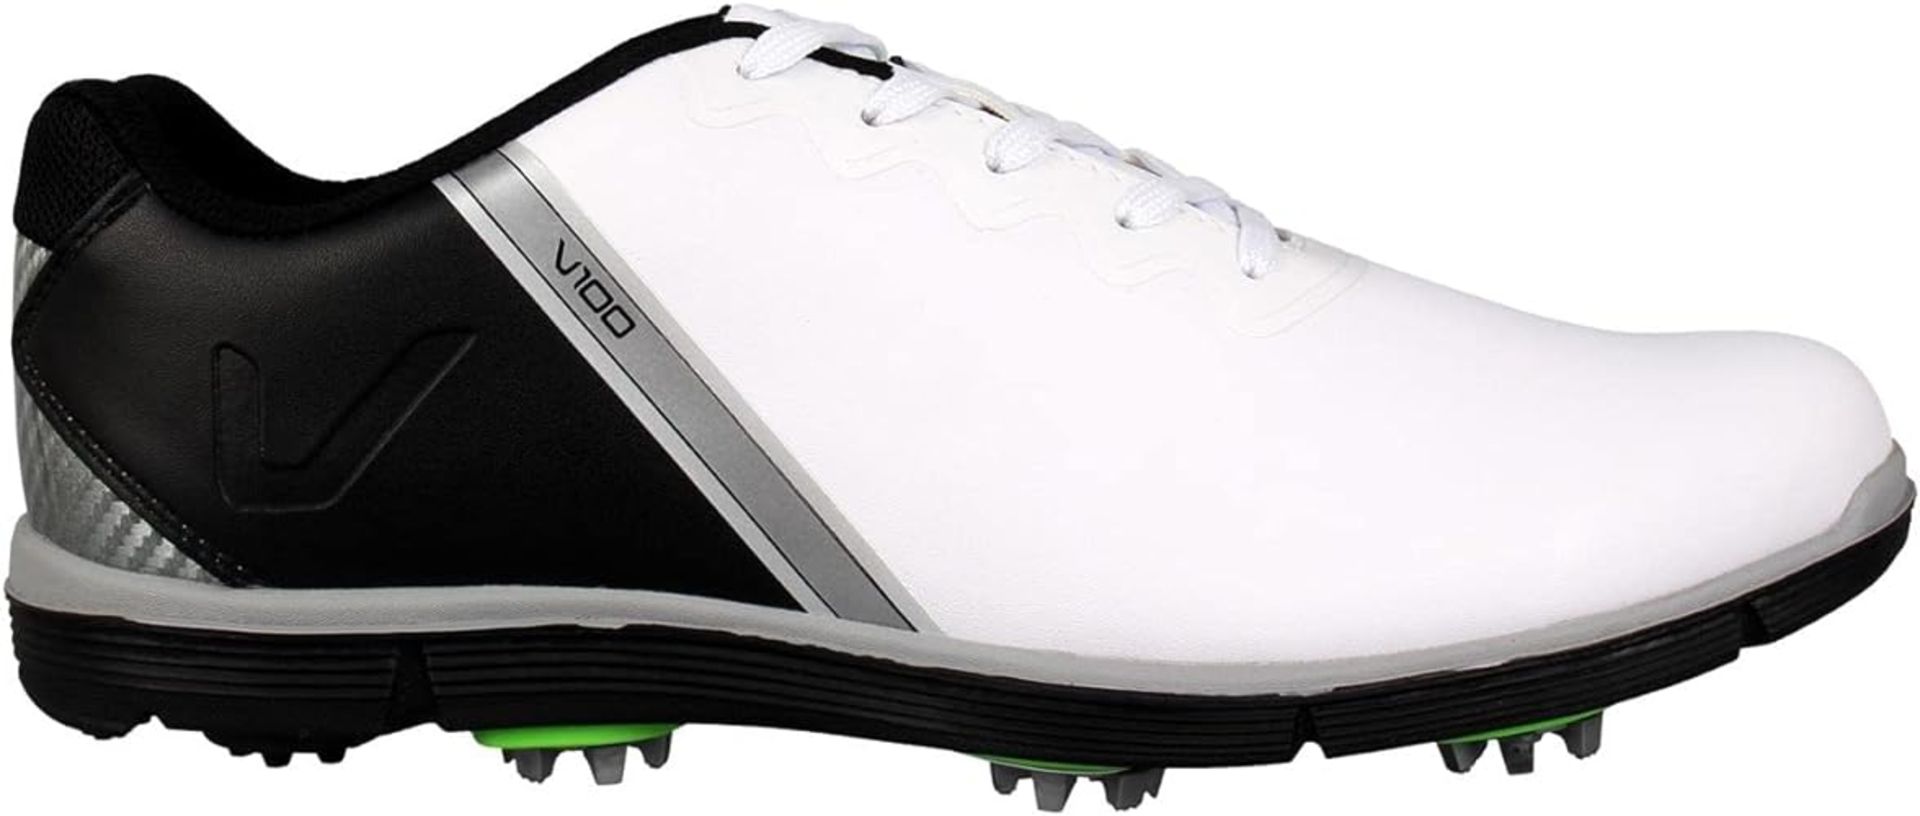 2 X BRAND NEW PAIRS OF SLAZENGER V100 PROFESSIONAL GOLF SHOES SIZE 10 RRP £89 EACH S1RA